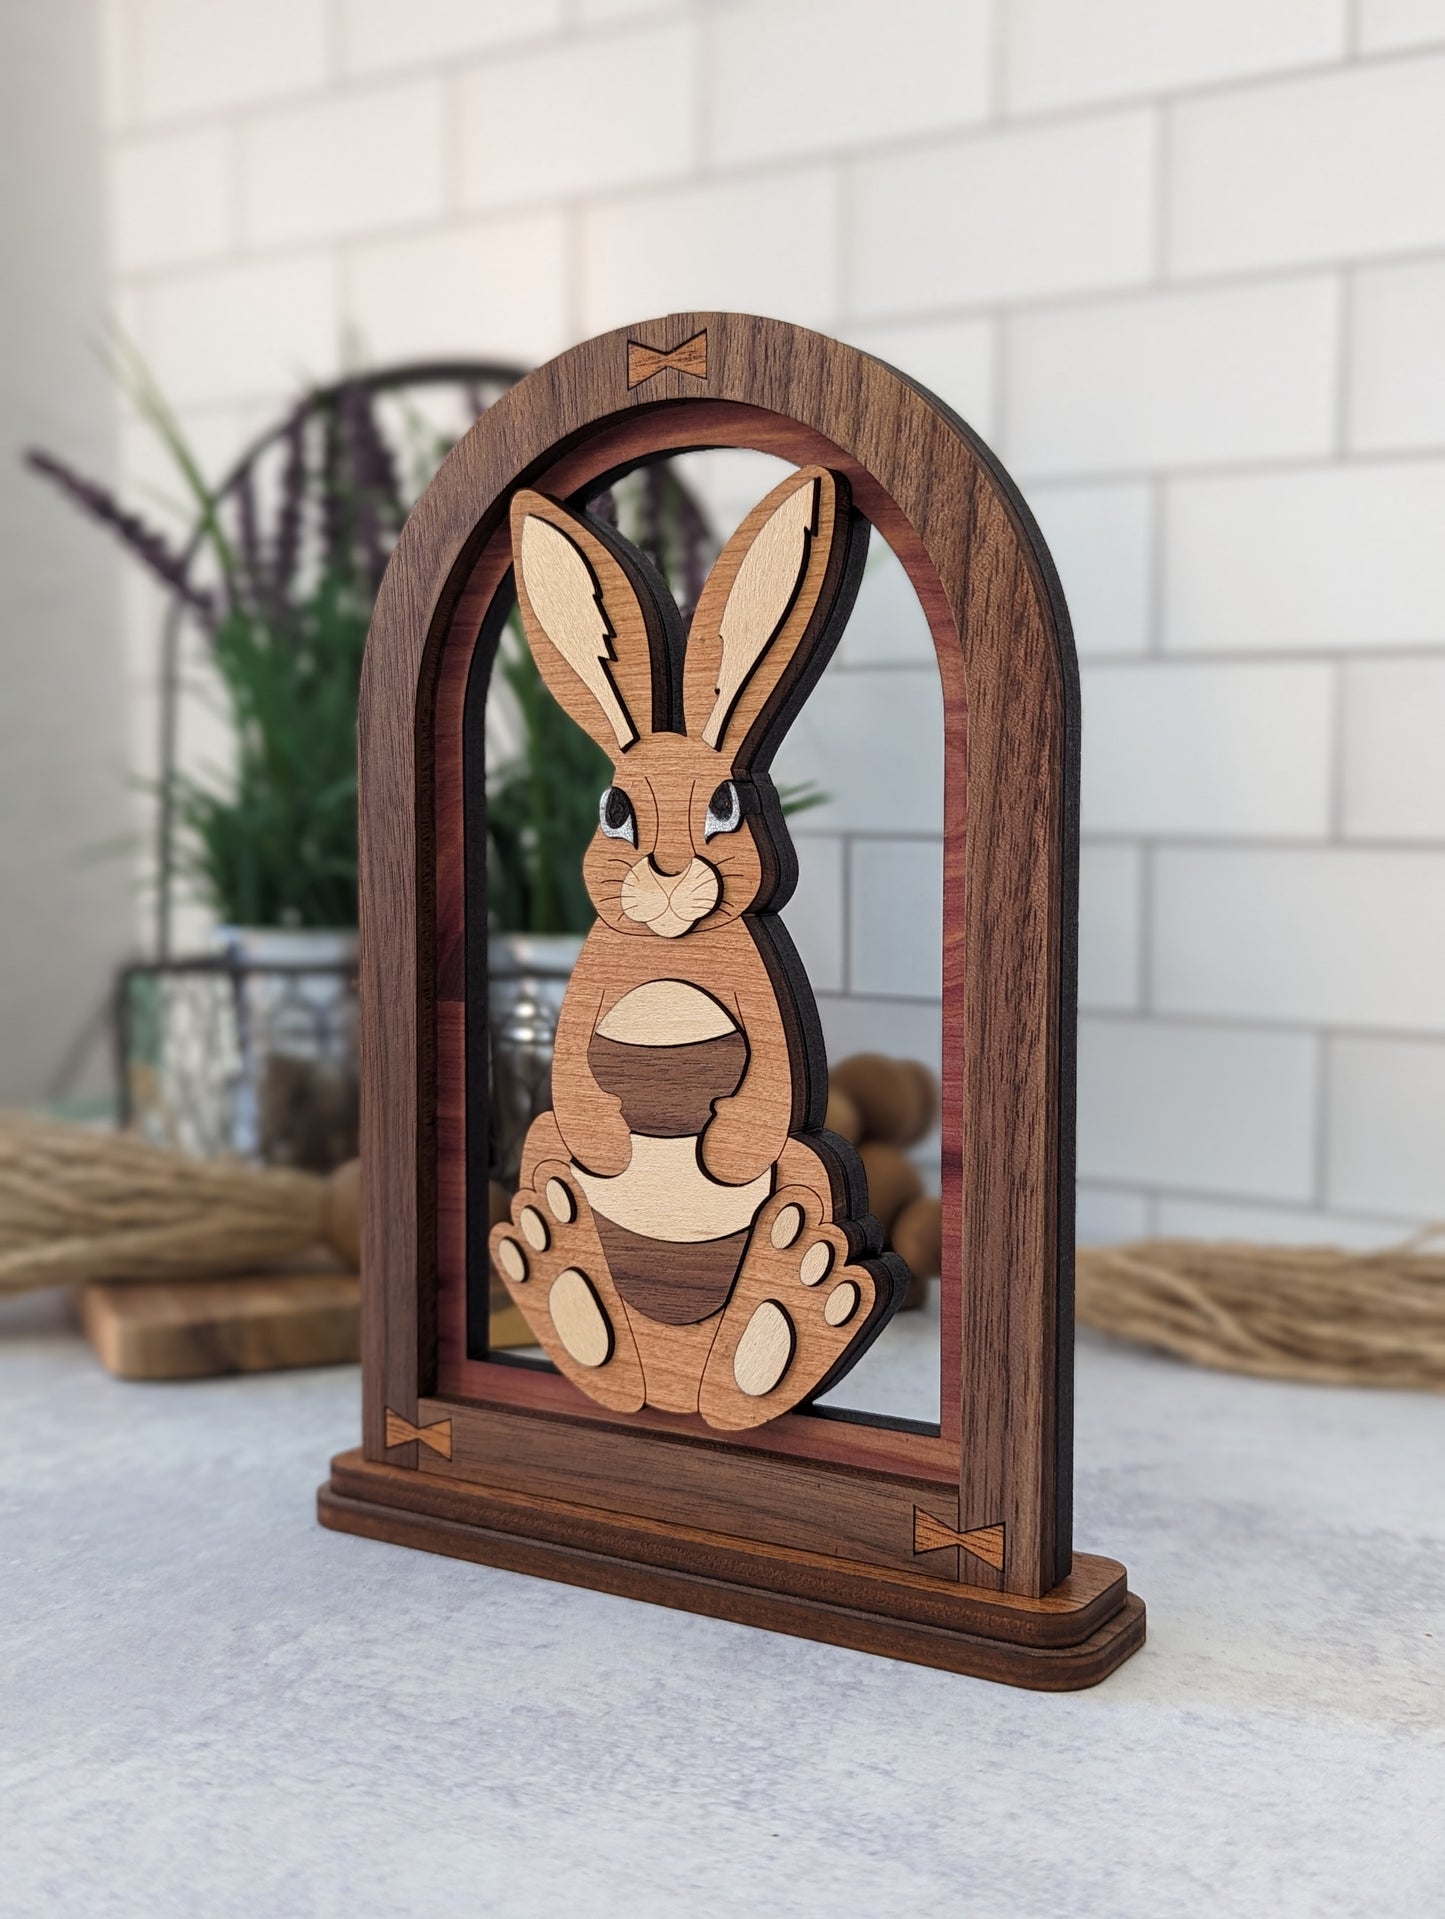 Handcrafted wooden Easter Arch shelf decor - Bunny, Chick, Cross, Lamb